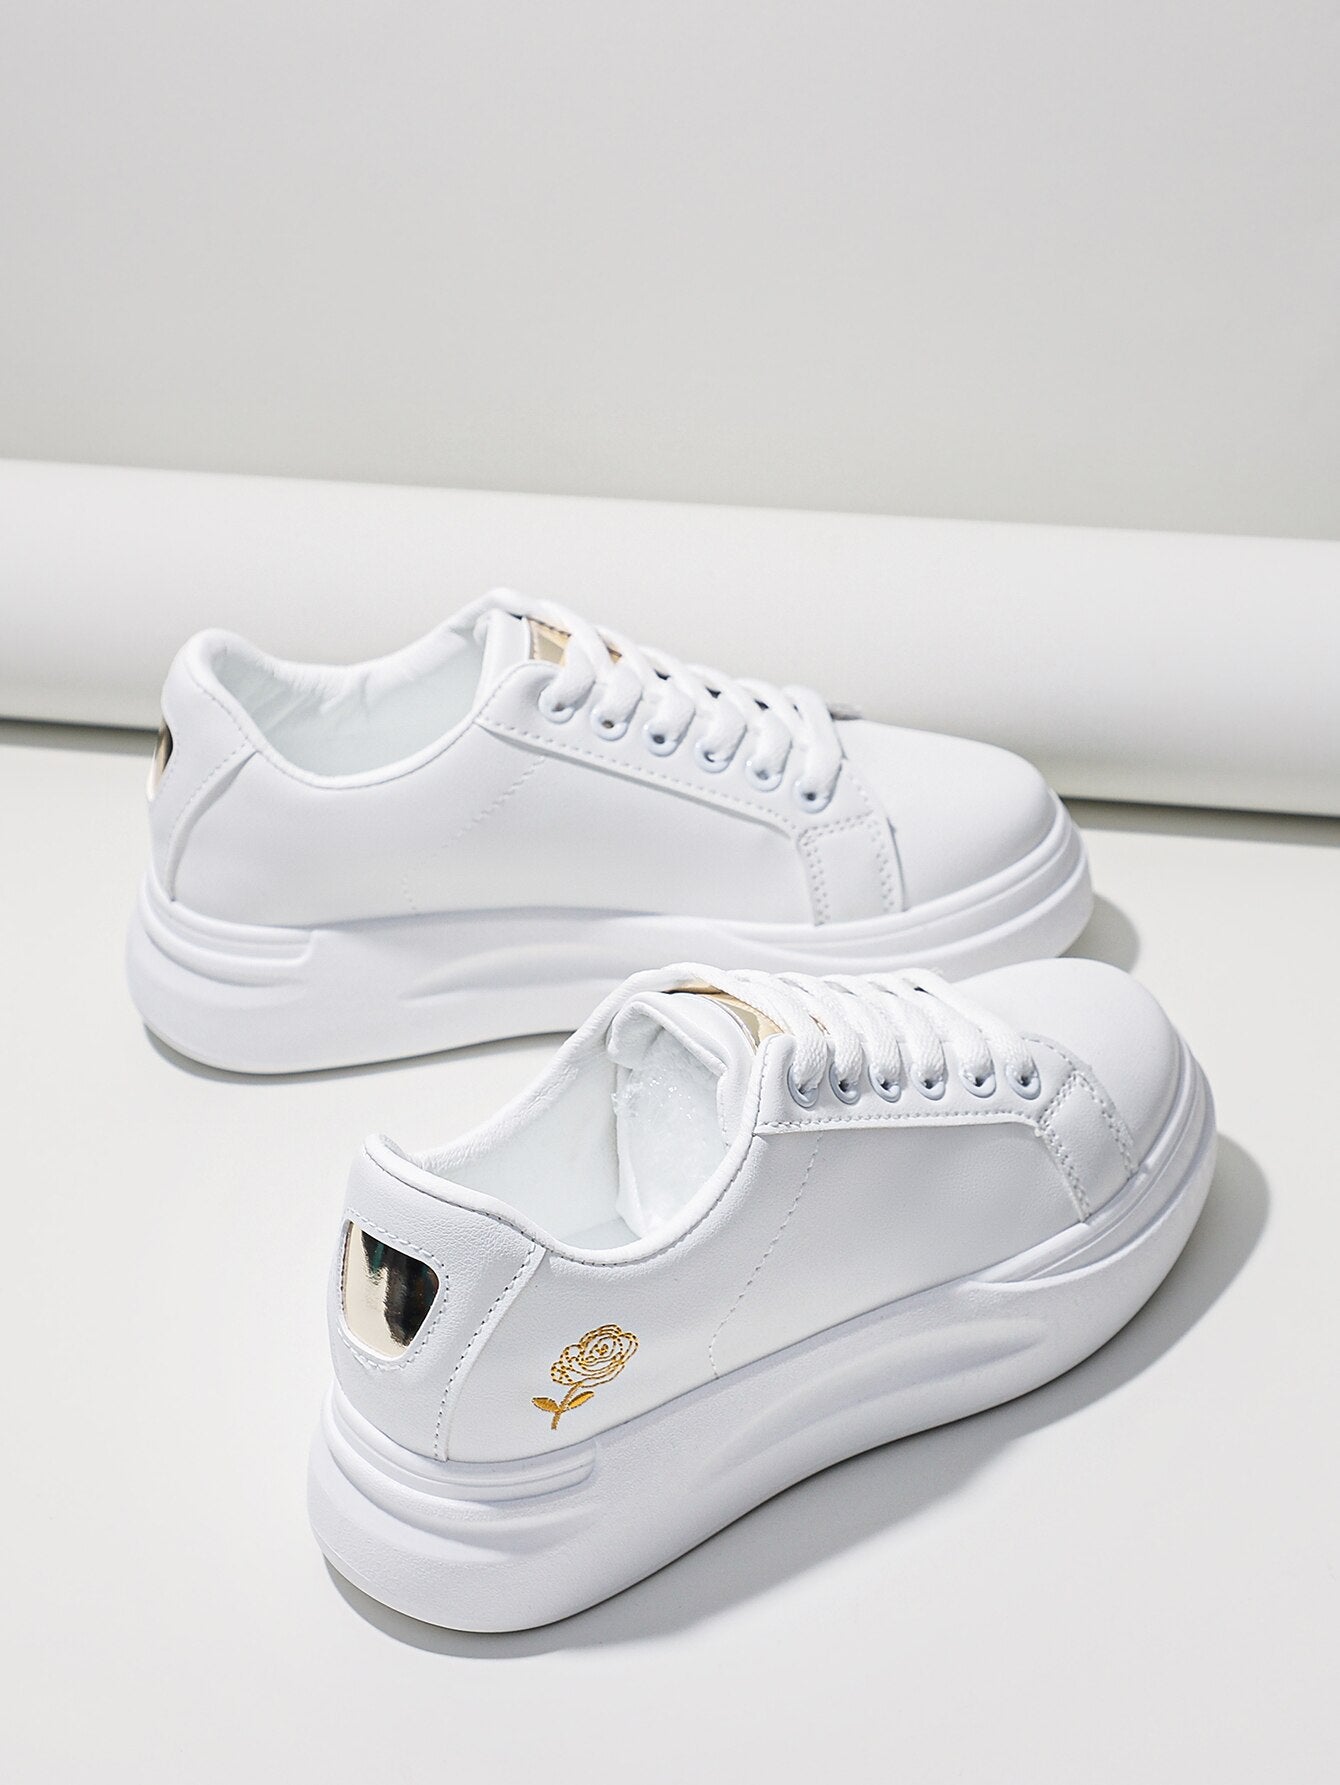 White Floral Embroidered Lace-Up Sneakers for Women